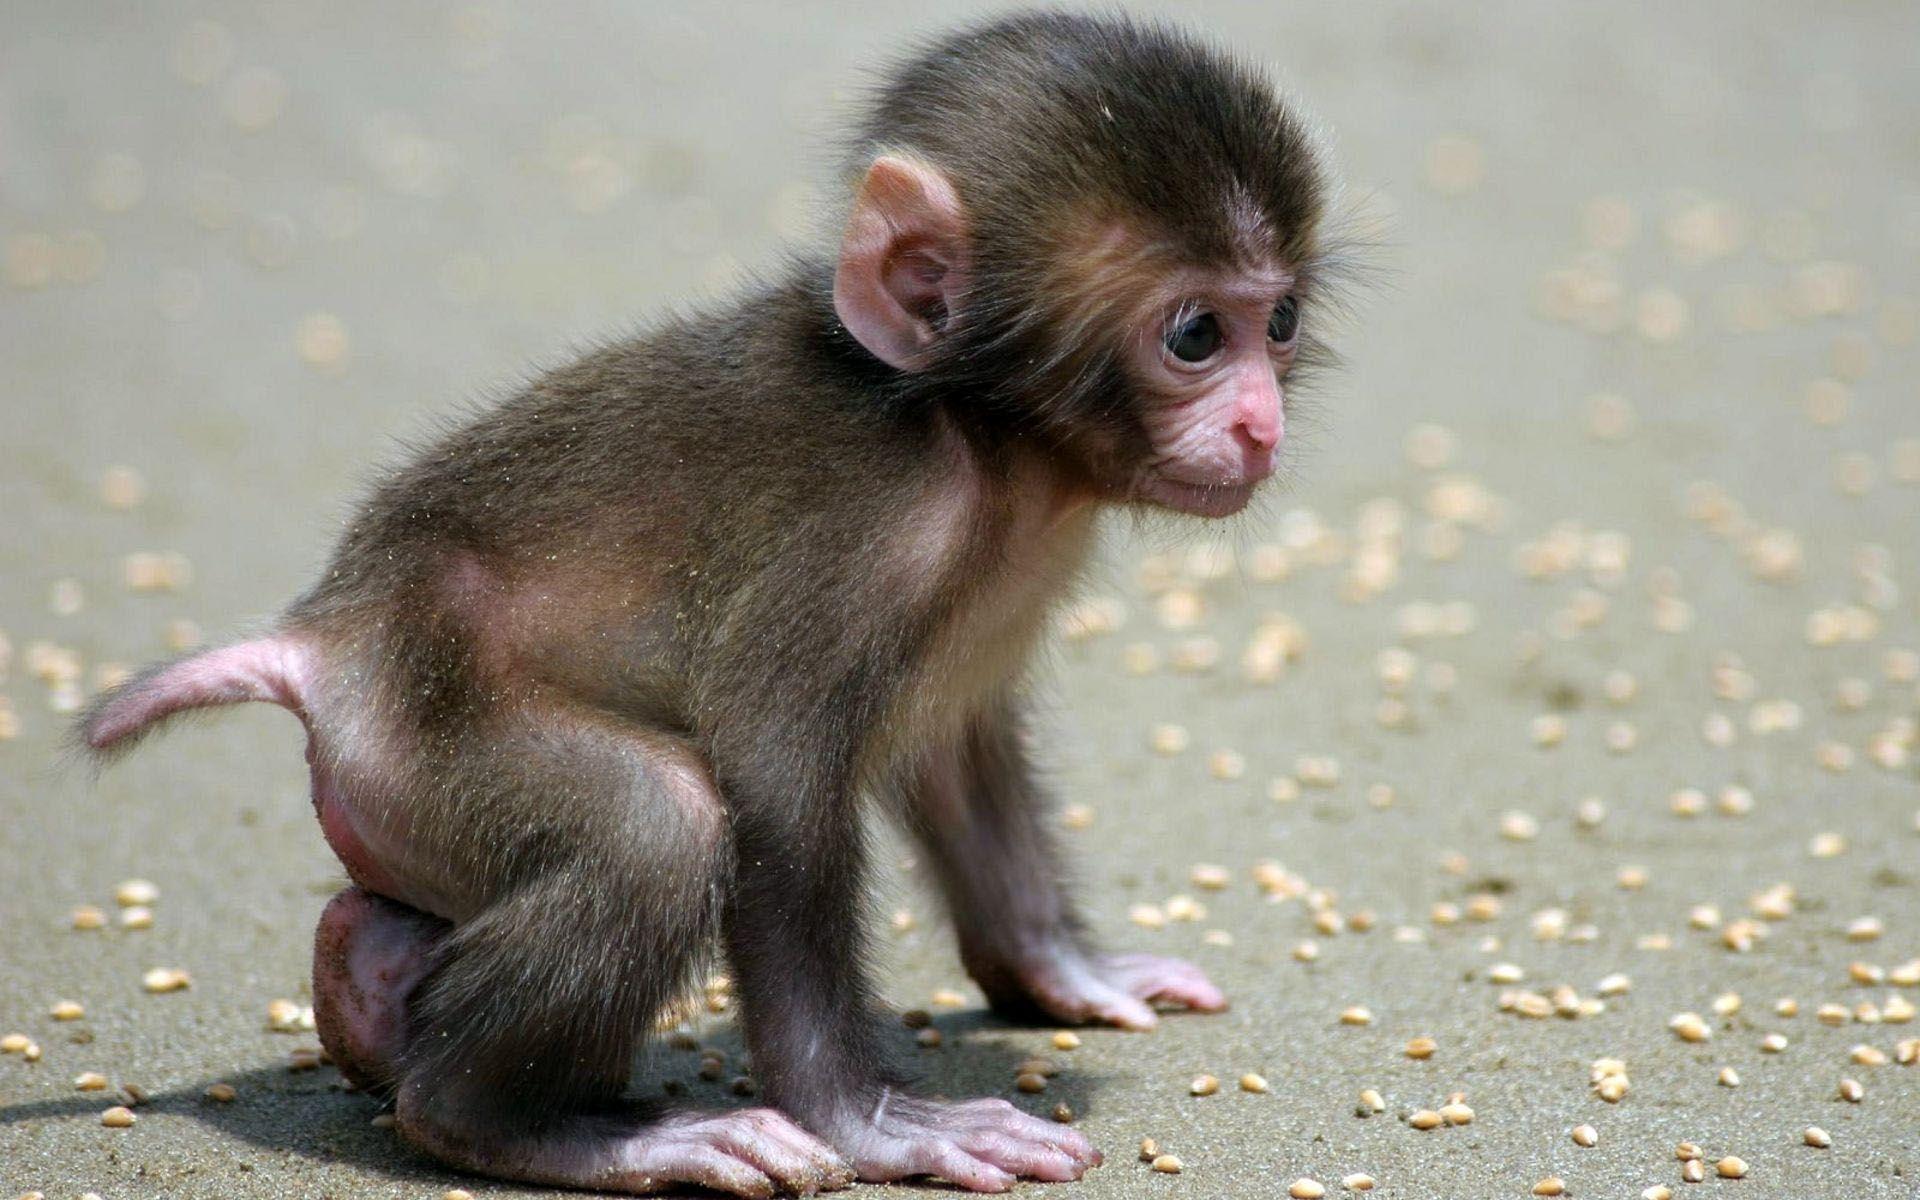 Cute Funny Monkey Picture Baby (8) Online. Amazing